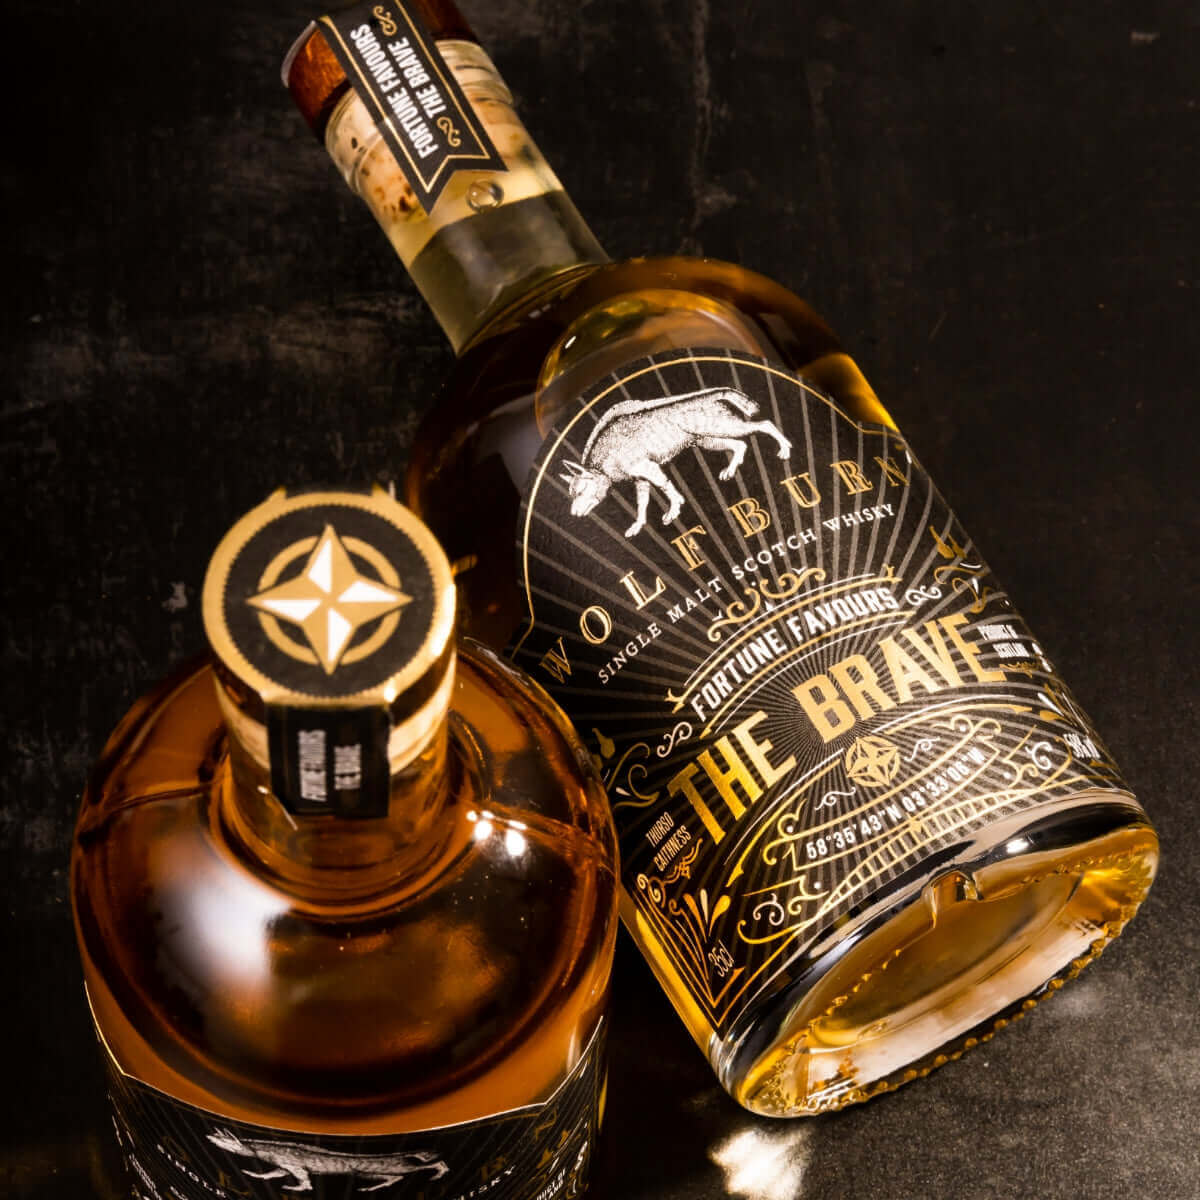 
                  
                    Wolfburn Distillery Wolfburn Fortune Favours the Brave – 58% vol. 35cl The 35cl Fortune Favours the Brave Langskip edition at 58%. Matured exclusively in first-fill ex-bourbon barrels. Distilled, matured and bottled at Wolfburn Distillery in Caithness, Sc
                  
                